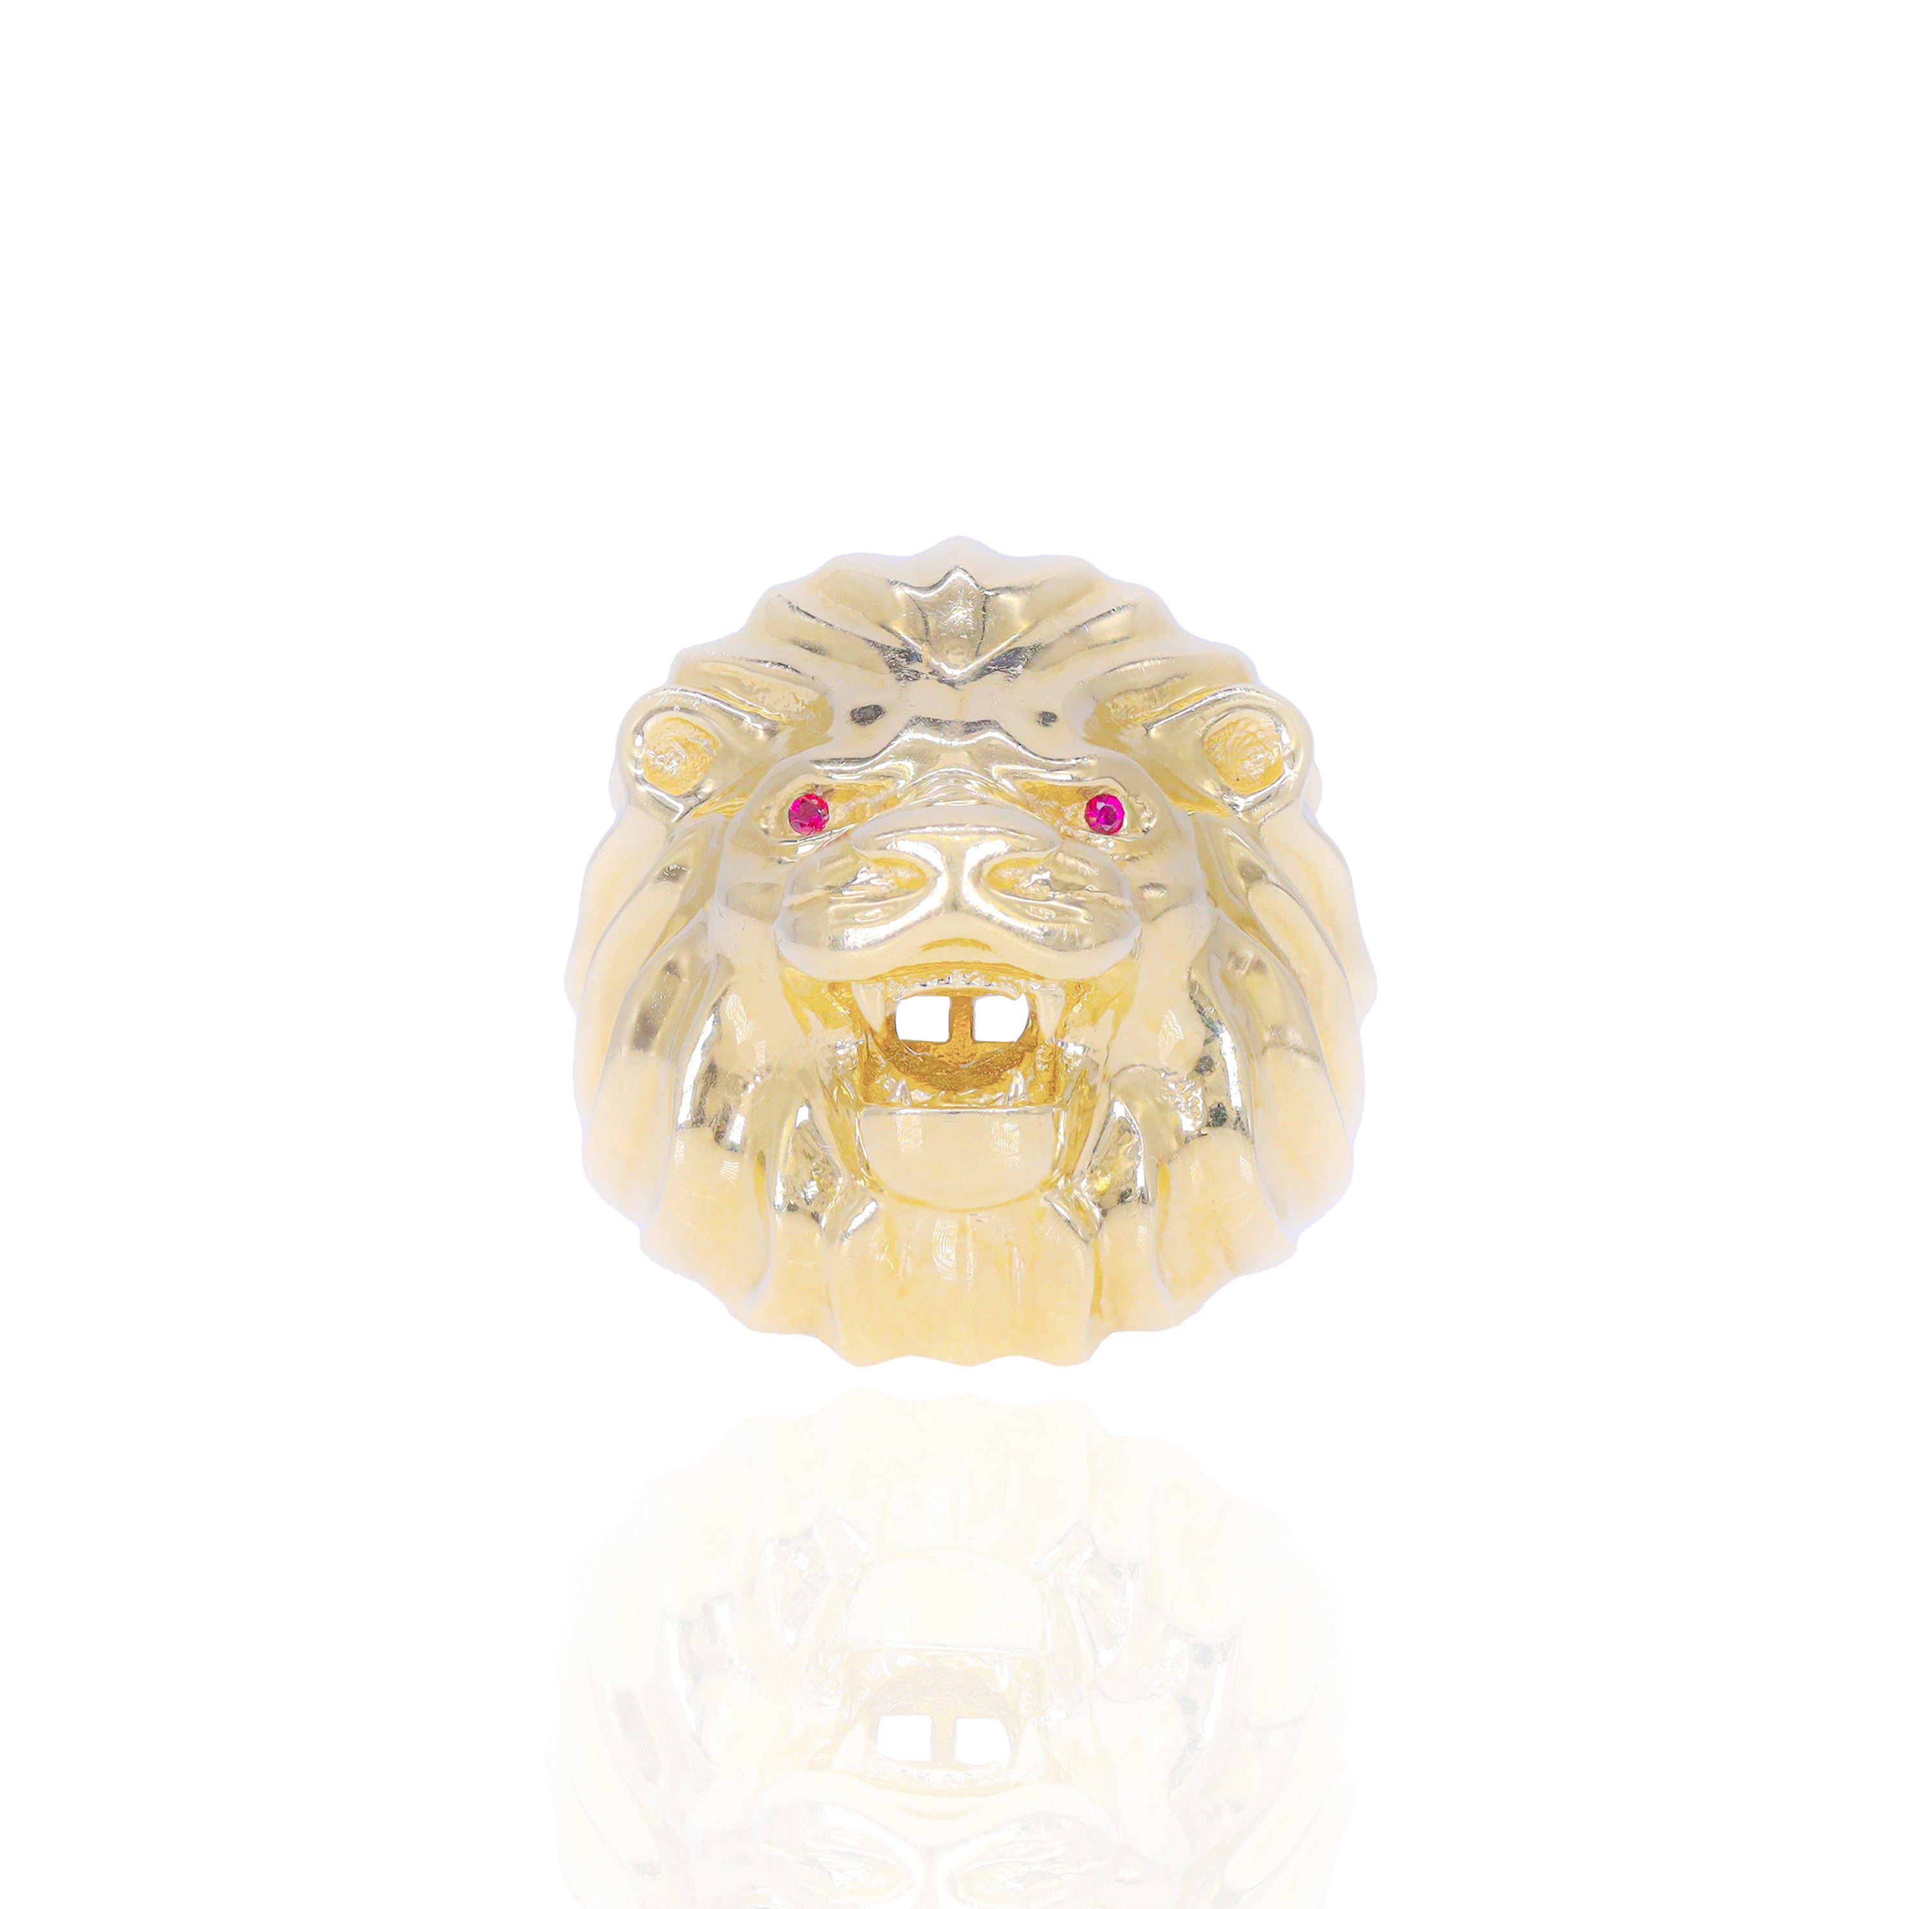 Lion Head Solid Gold Ring w/ Red Rubies Eyes